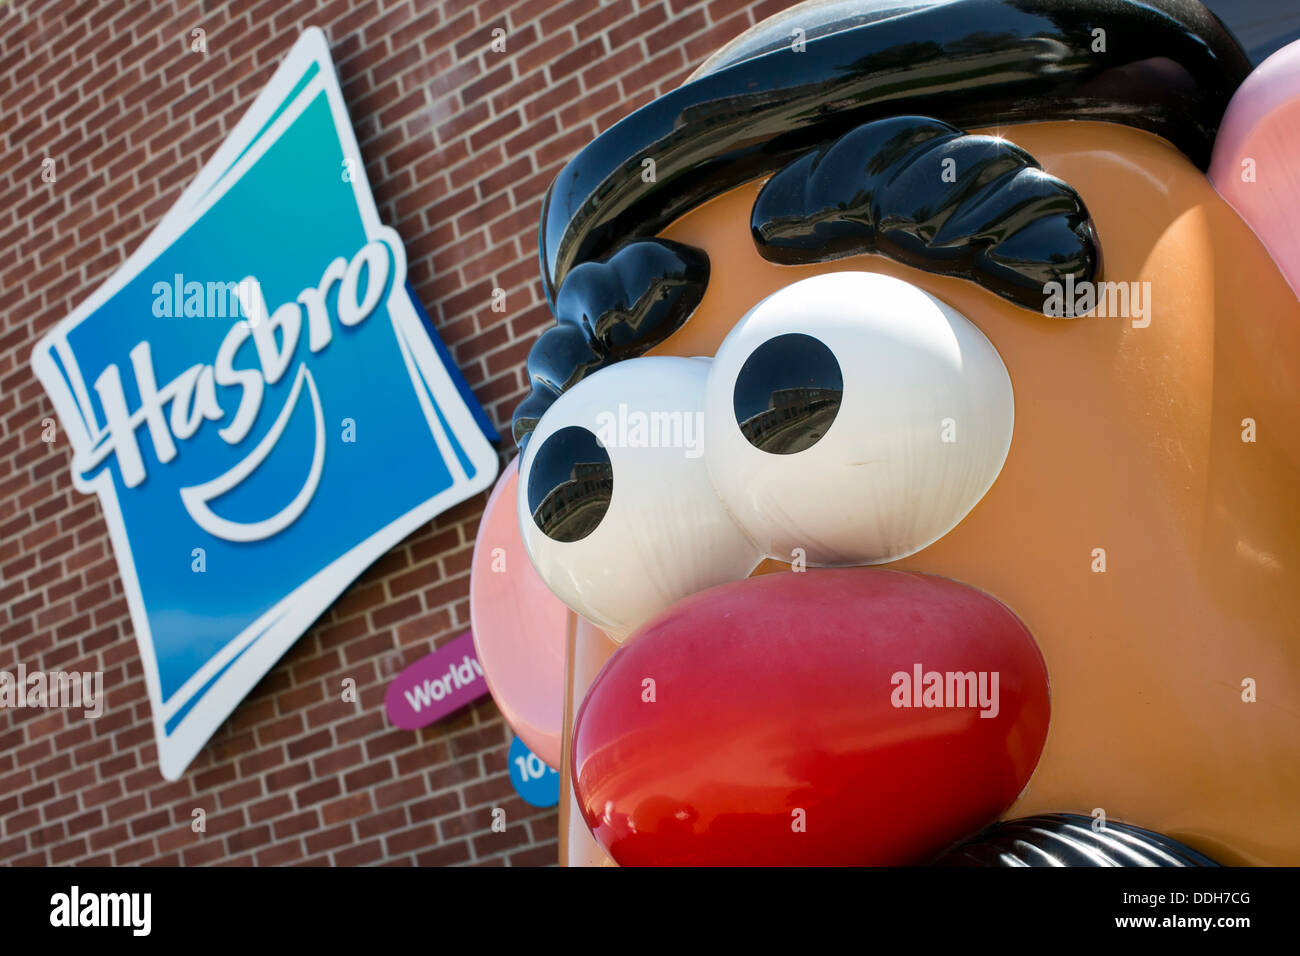 The headquarters of toy maker Hasbro, with a giant Mr. Potato Head figure.  Stock Photo